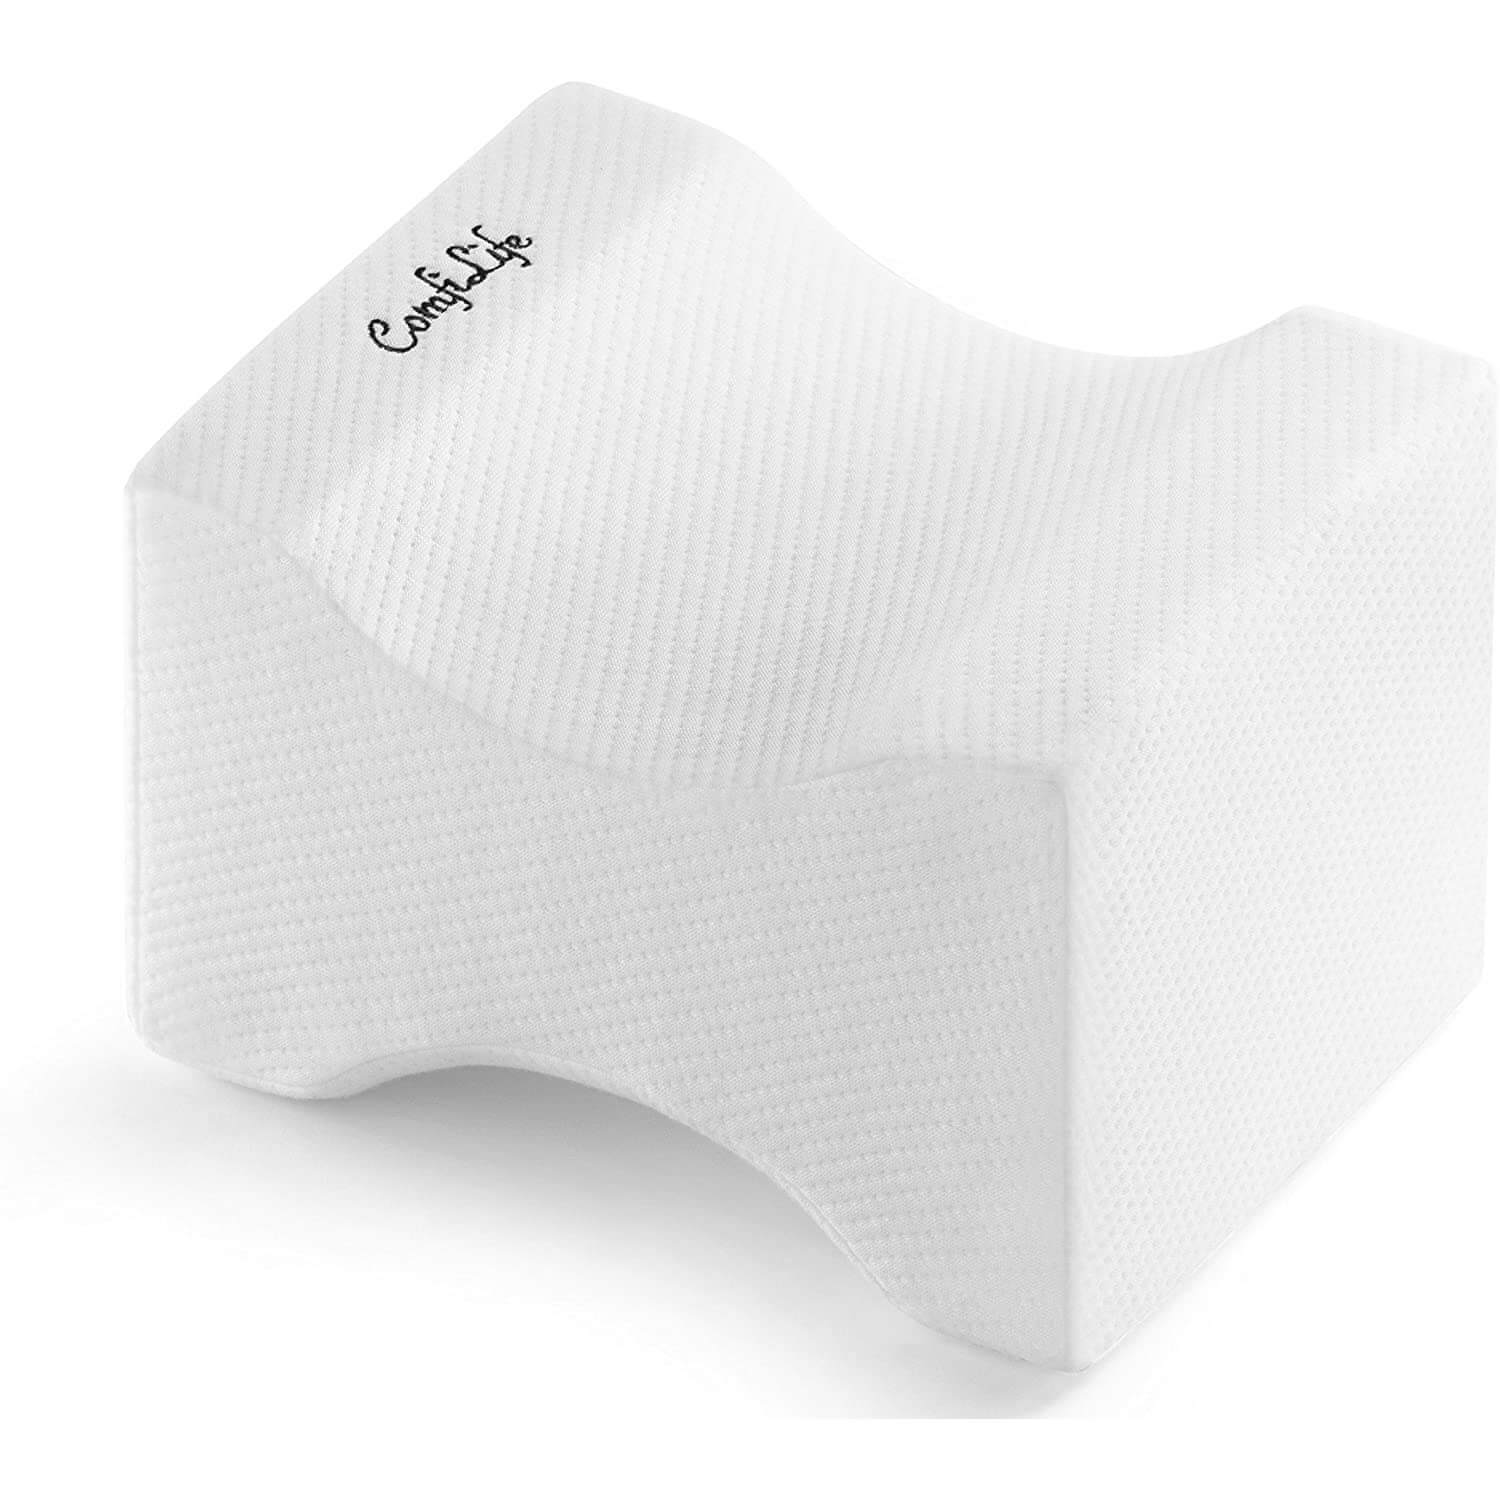 Knee Pillow w/Strap - New 3-Level Contour Memory Foam Leg Separator & Side Sleeper Design, Large to Small Support & Hip Alignment for Lower Back, Join